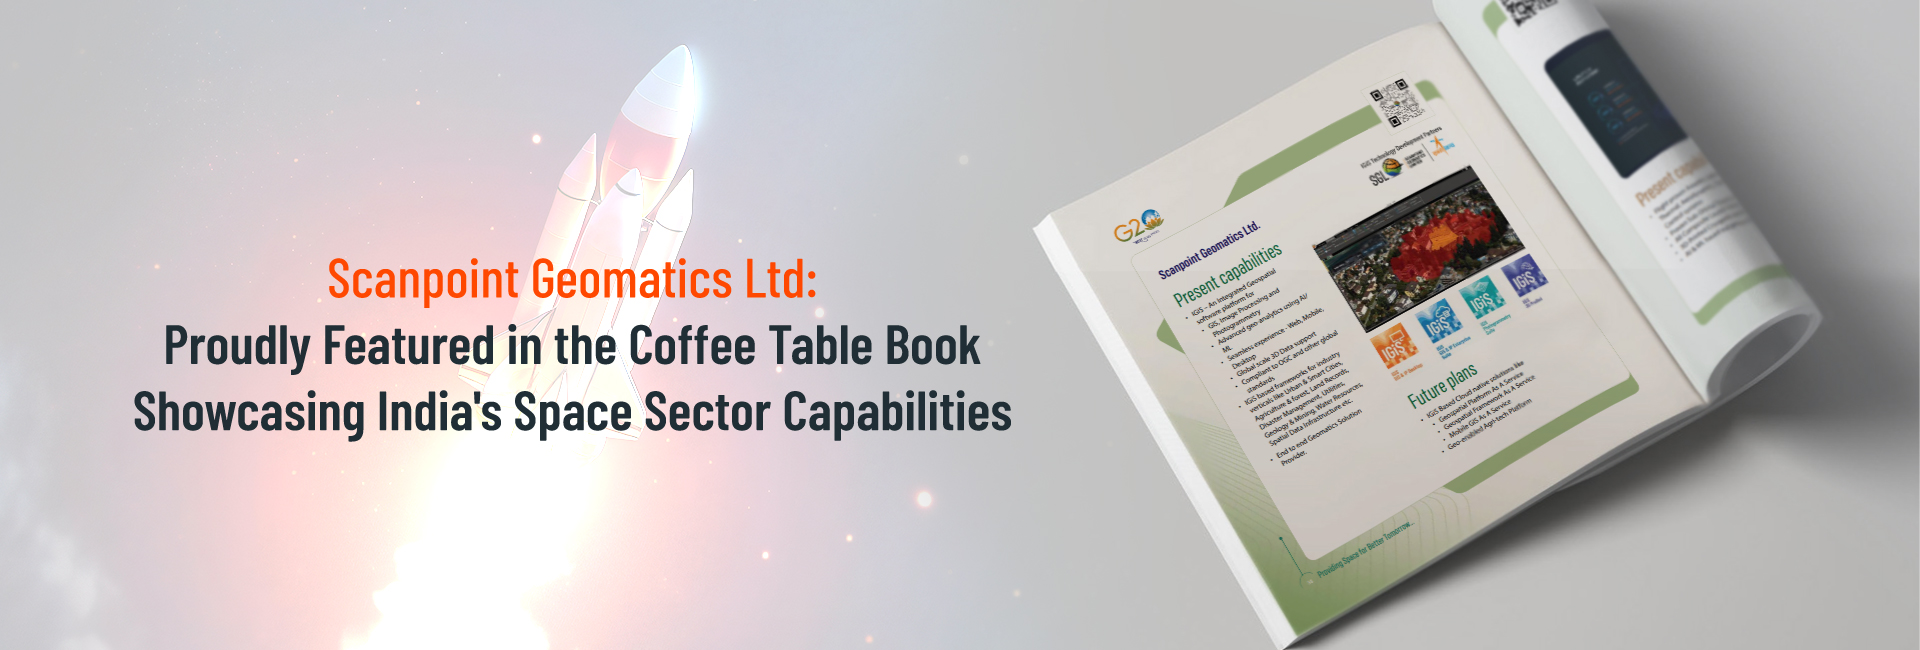 Scanpoint Geomatics Ltd: Proudly Featured in the Coffee Table Book Showcasing India’s Space Sector Capabilities